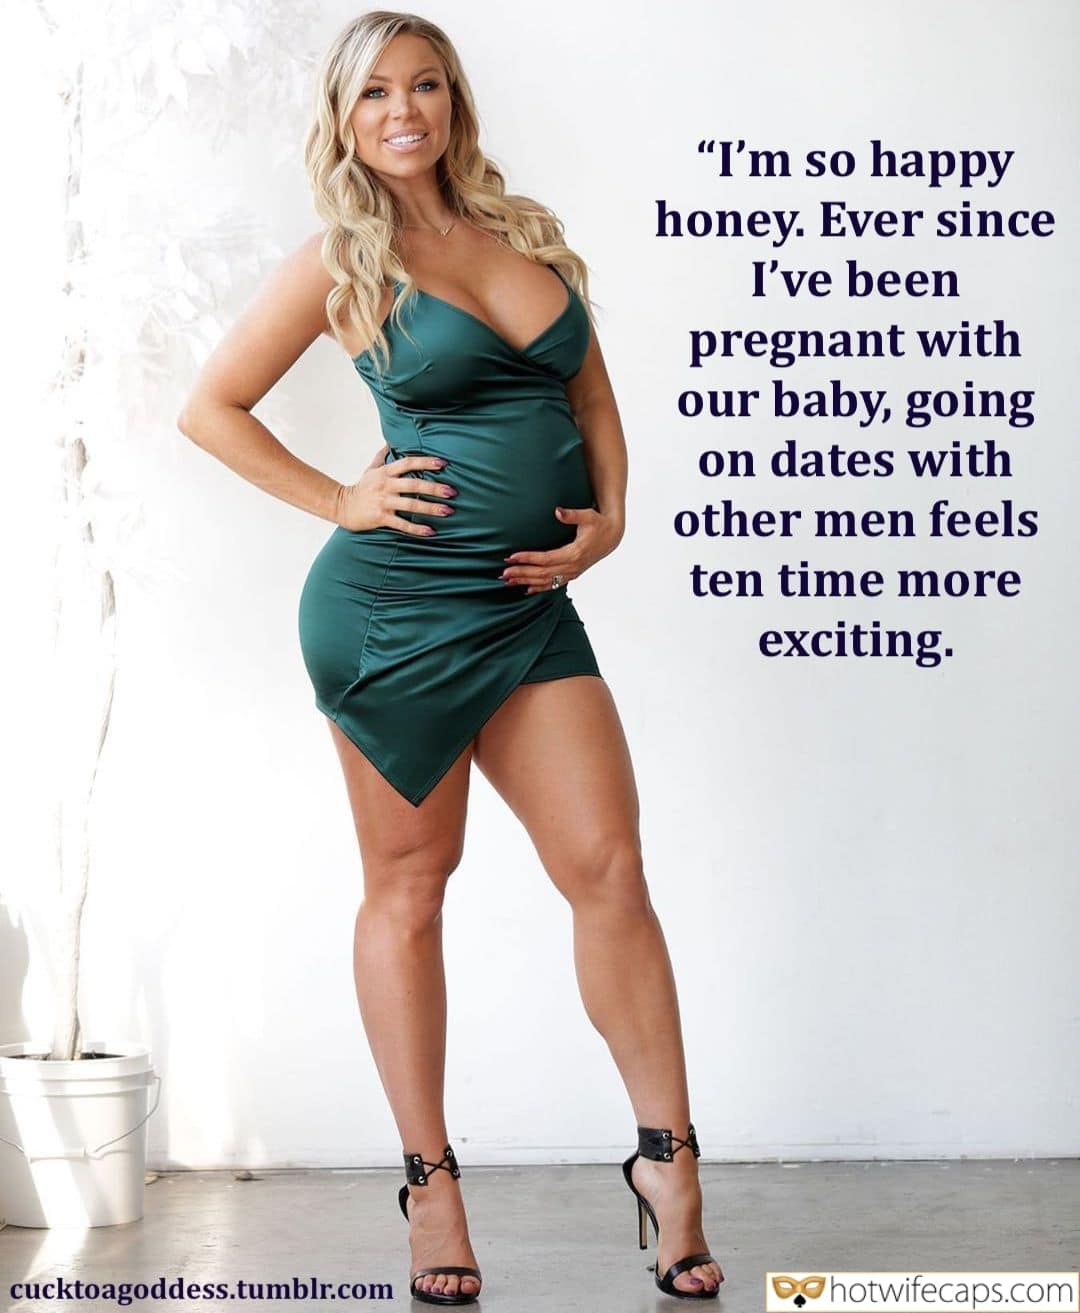 Wife Sharing Tips Sexy Memes Public My Favorite Cheating hotwife caption: “I’m so happy honey. Ever since I’ve been pregnant with our baby, going on dates with other men feels ten times more exciting. Very Beautiful Pregnant Blonde